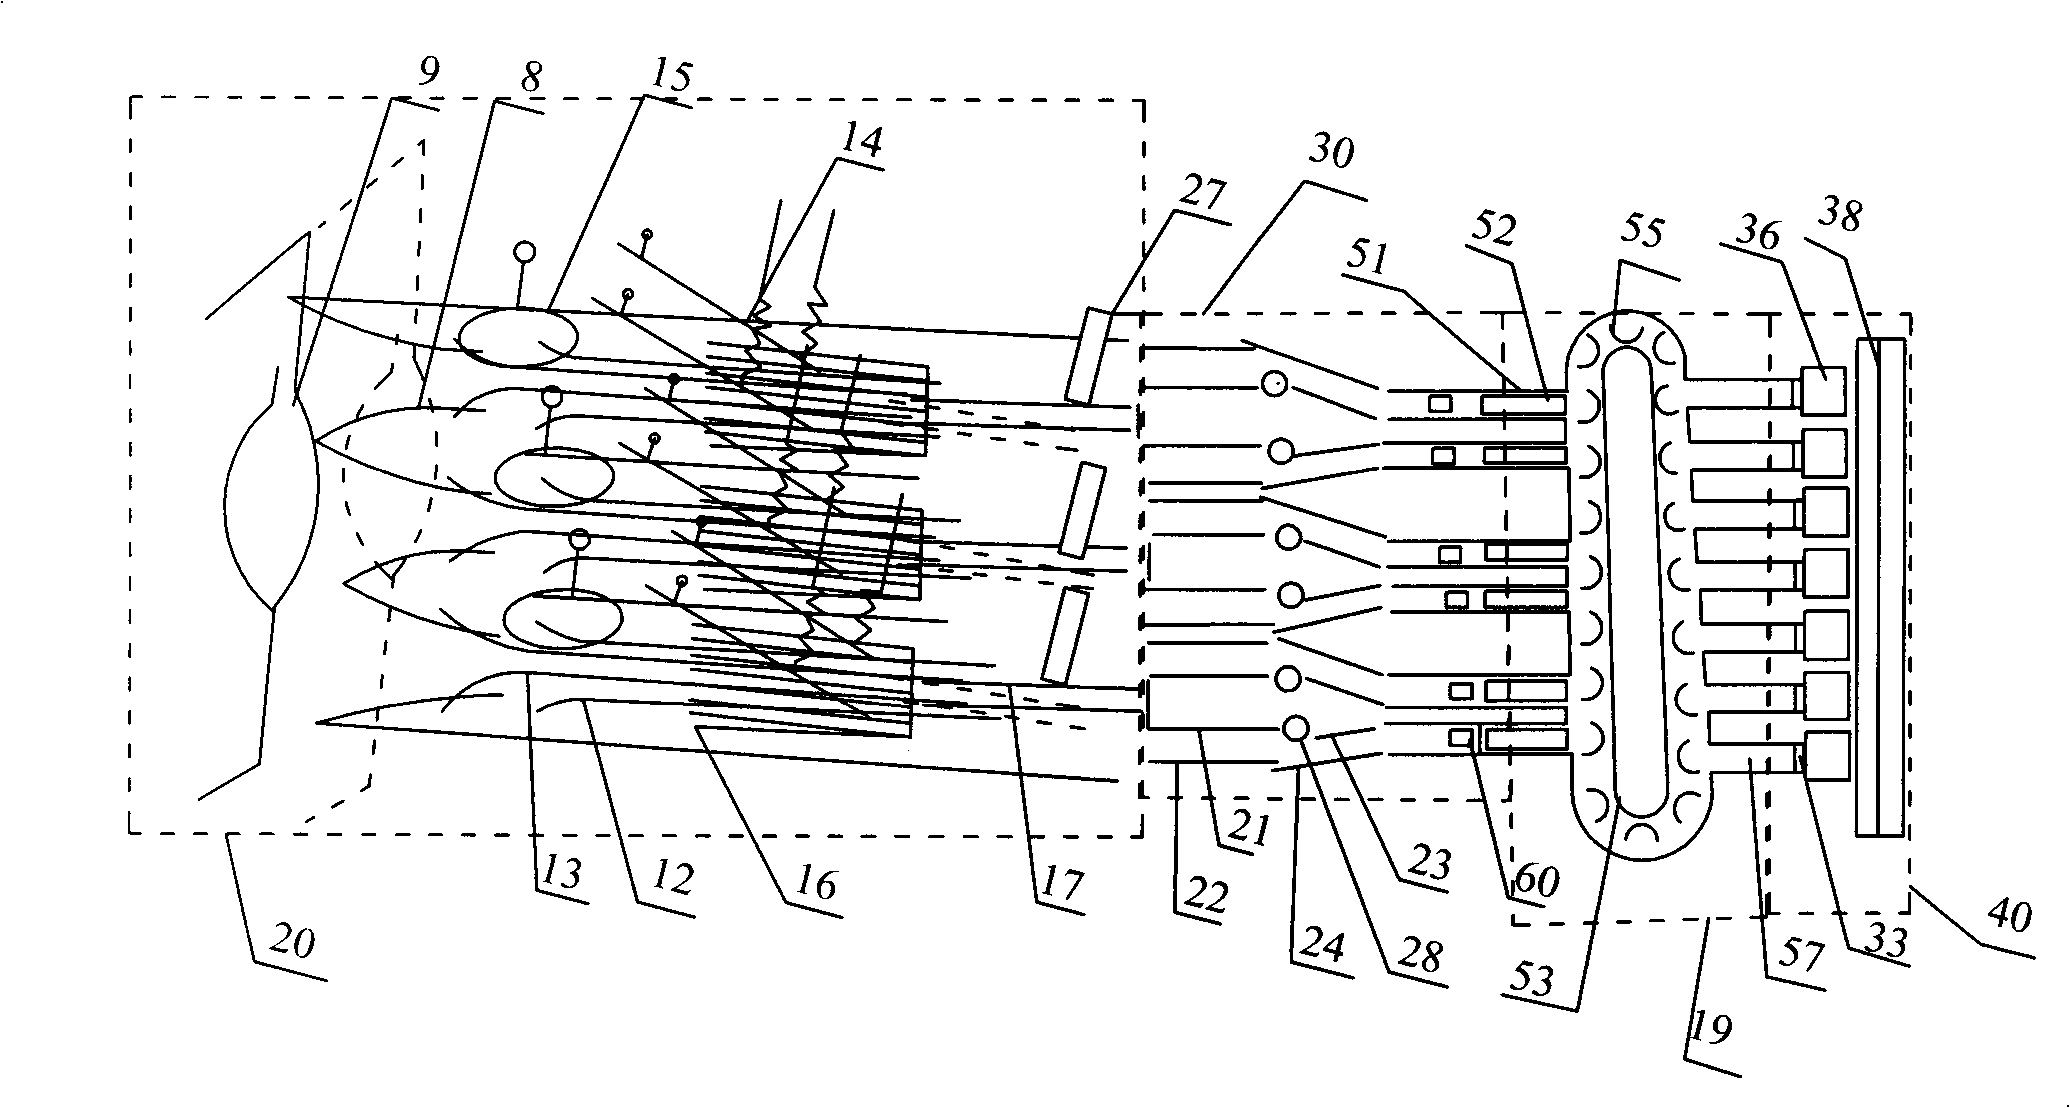 Full-automatic accurate garlic transplanter and planting method